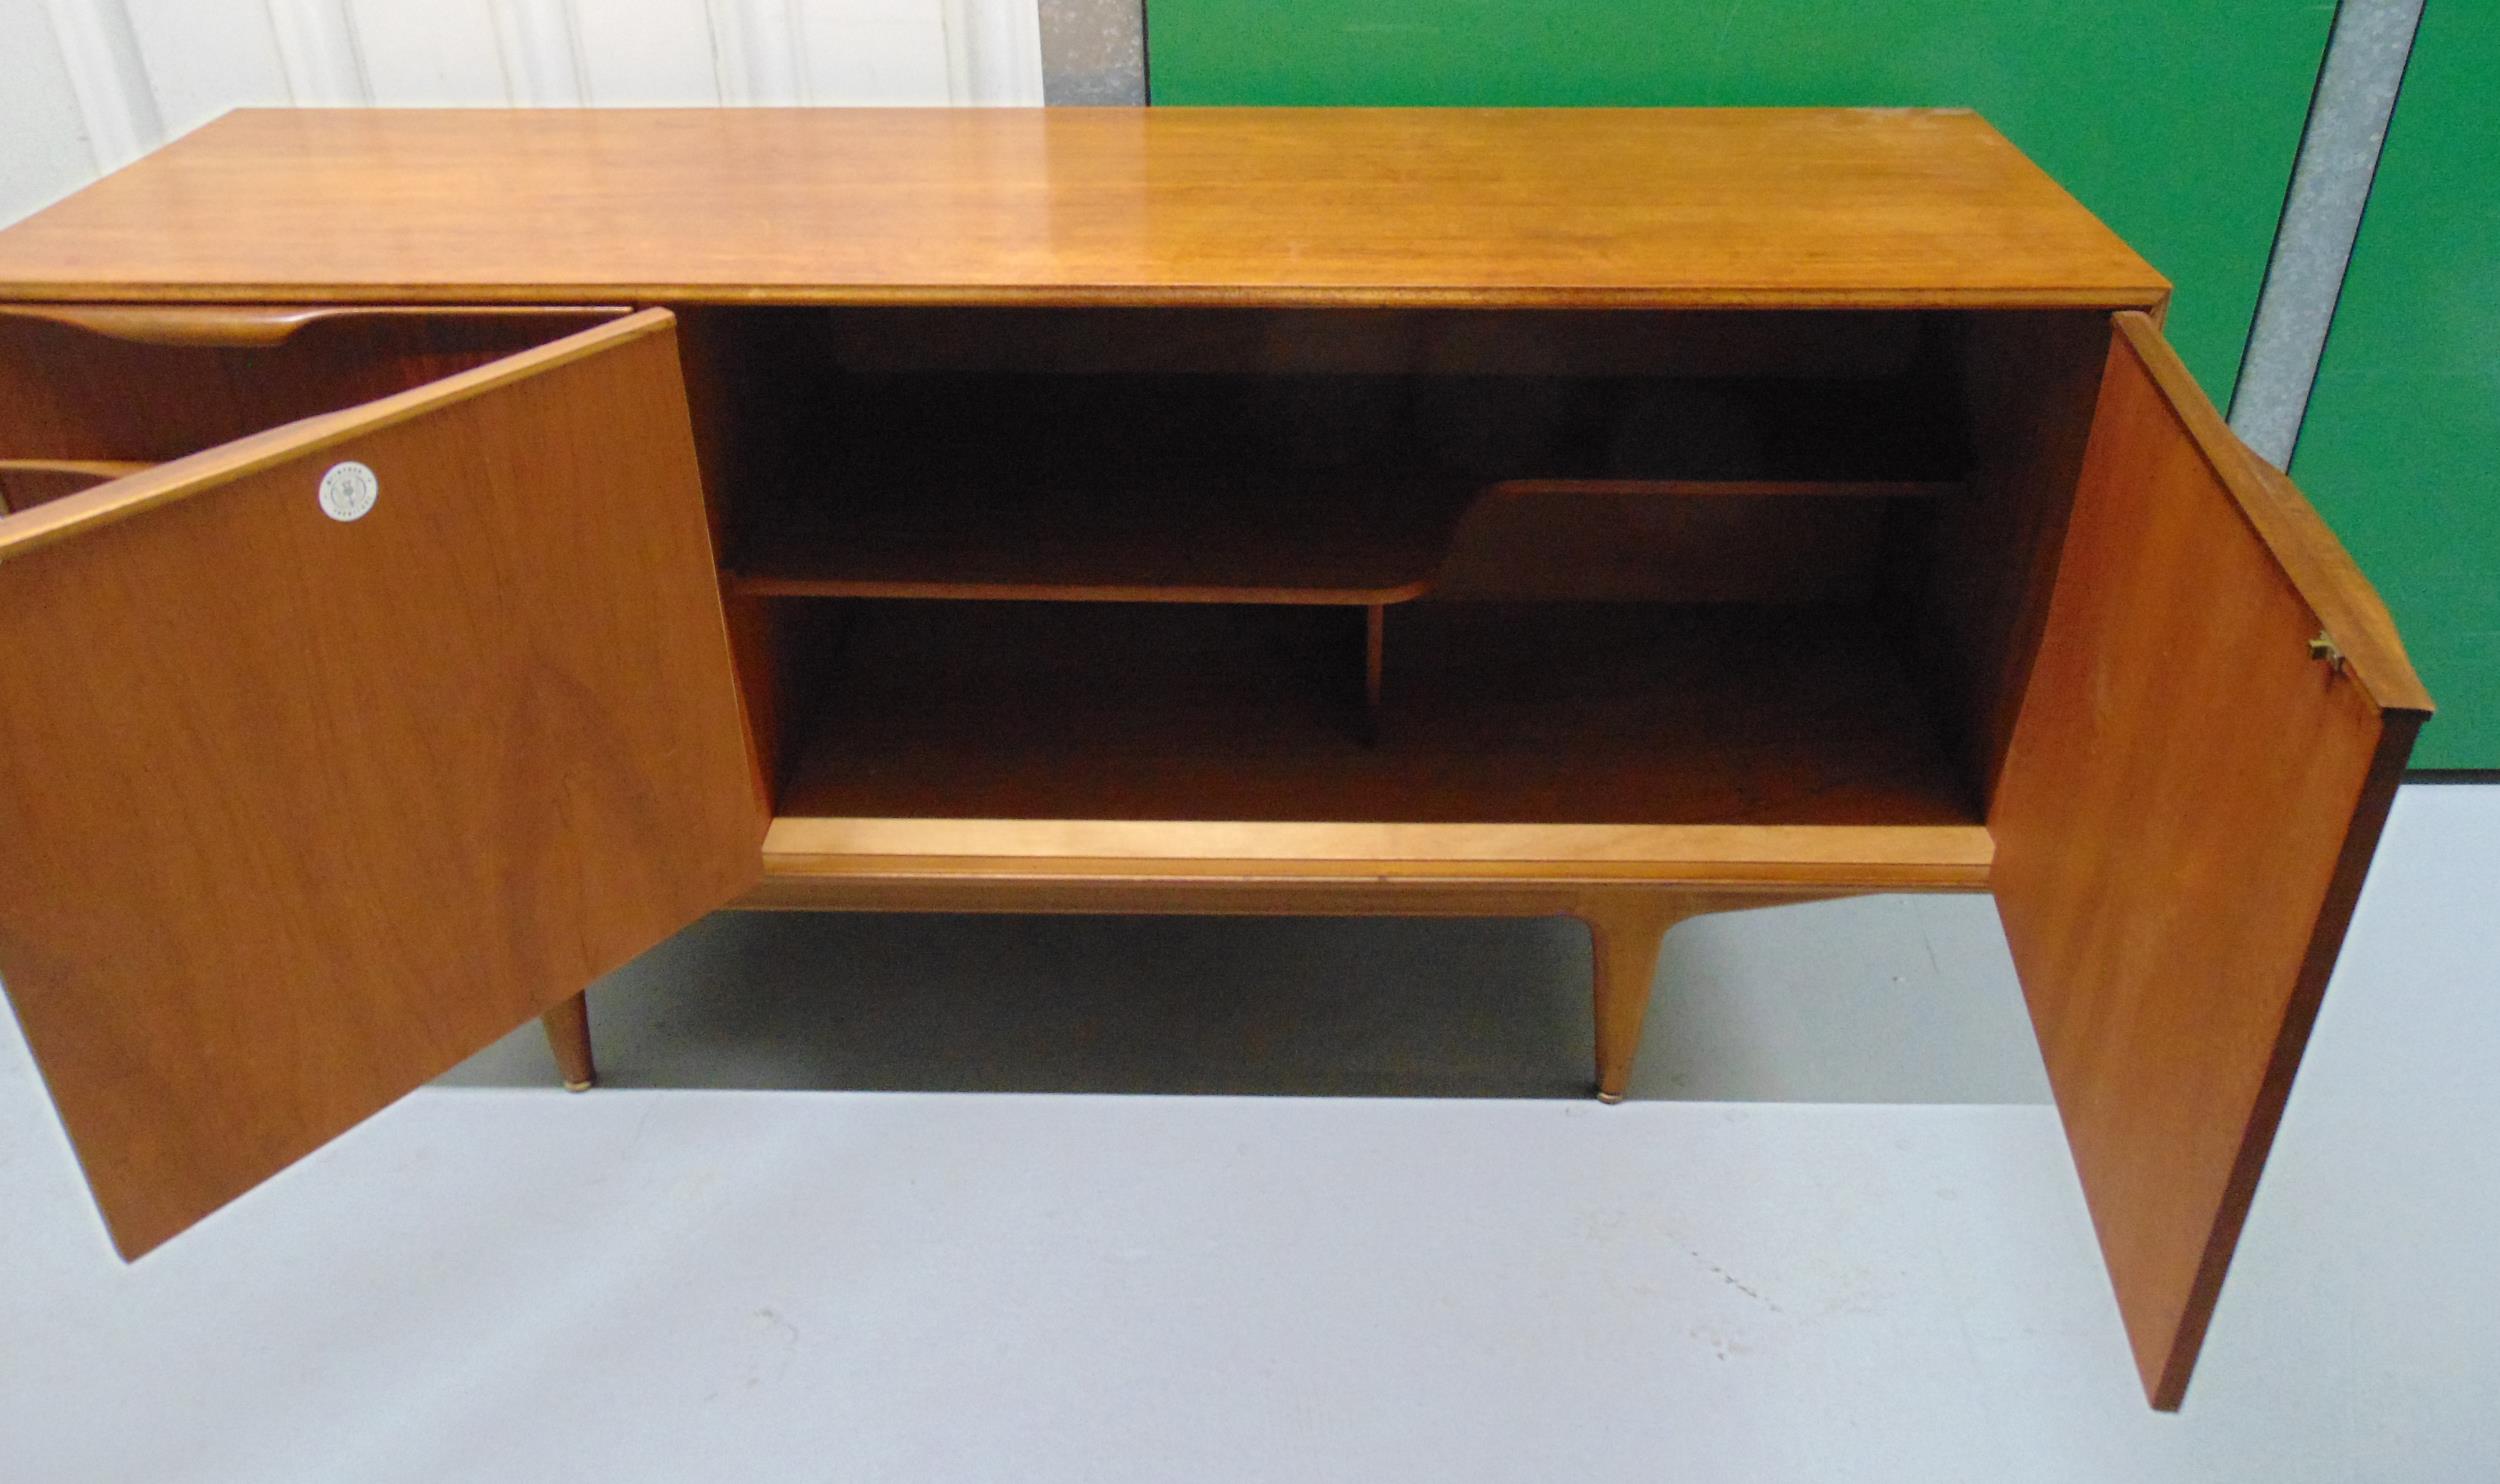 A mid 20th century McIntosh rectangular teak sideboard with cupboards and three drawers on - Image 2 of 4